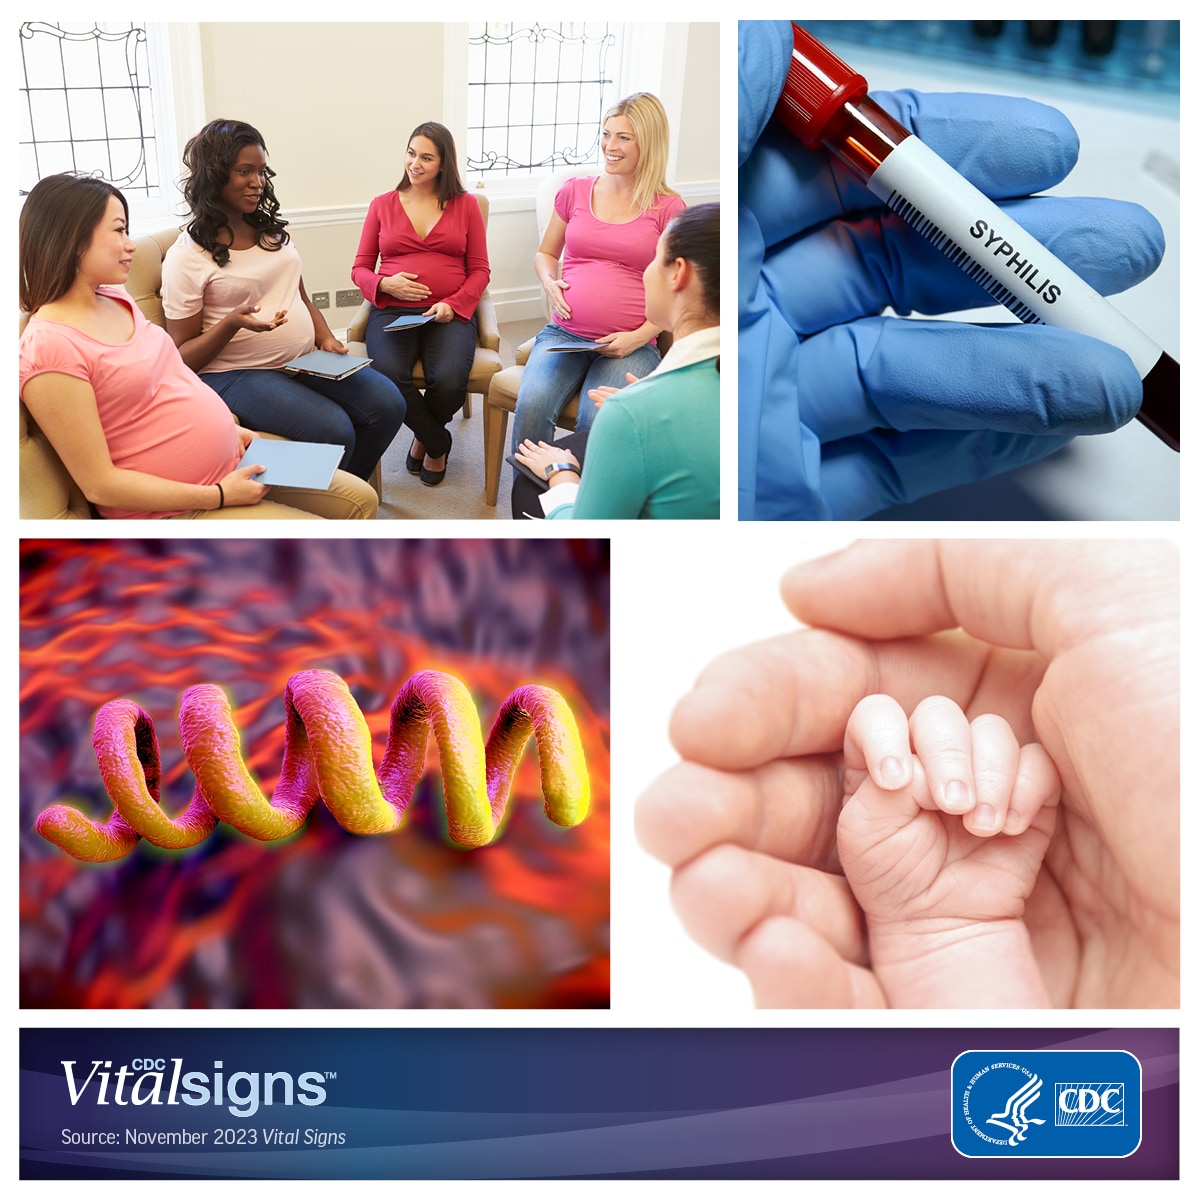 Collage of pregnant women talking, syphilis vaccine, CGI rendering of syphilis virus, and an adult hand holding an infant's hand.